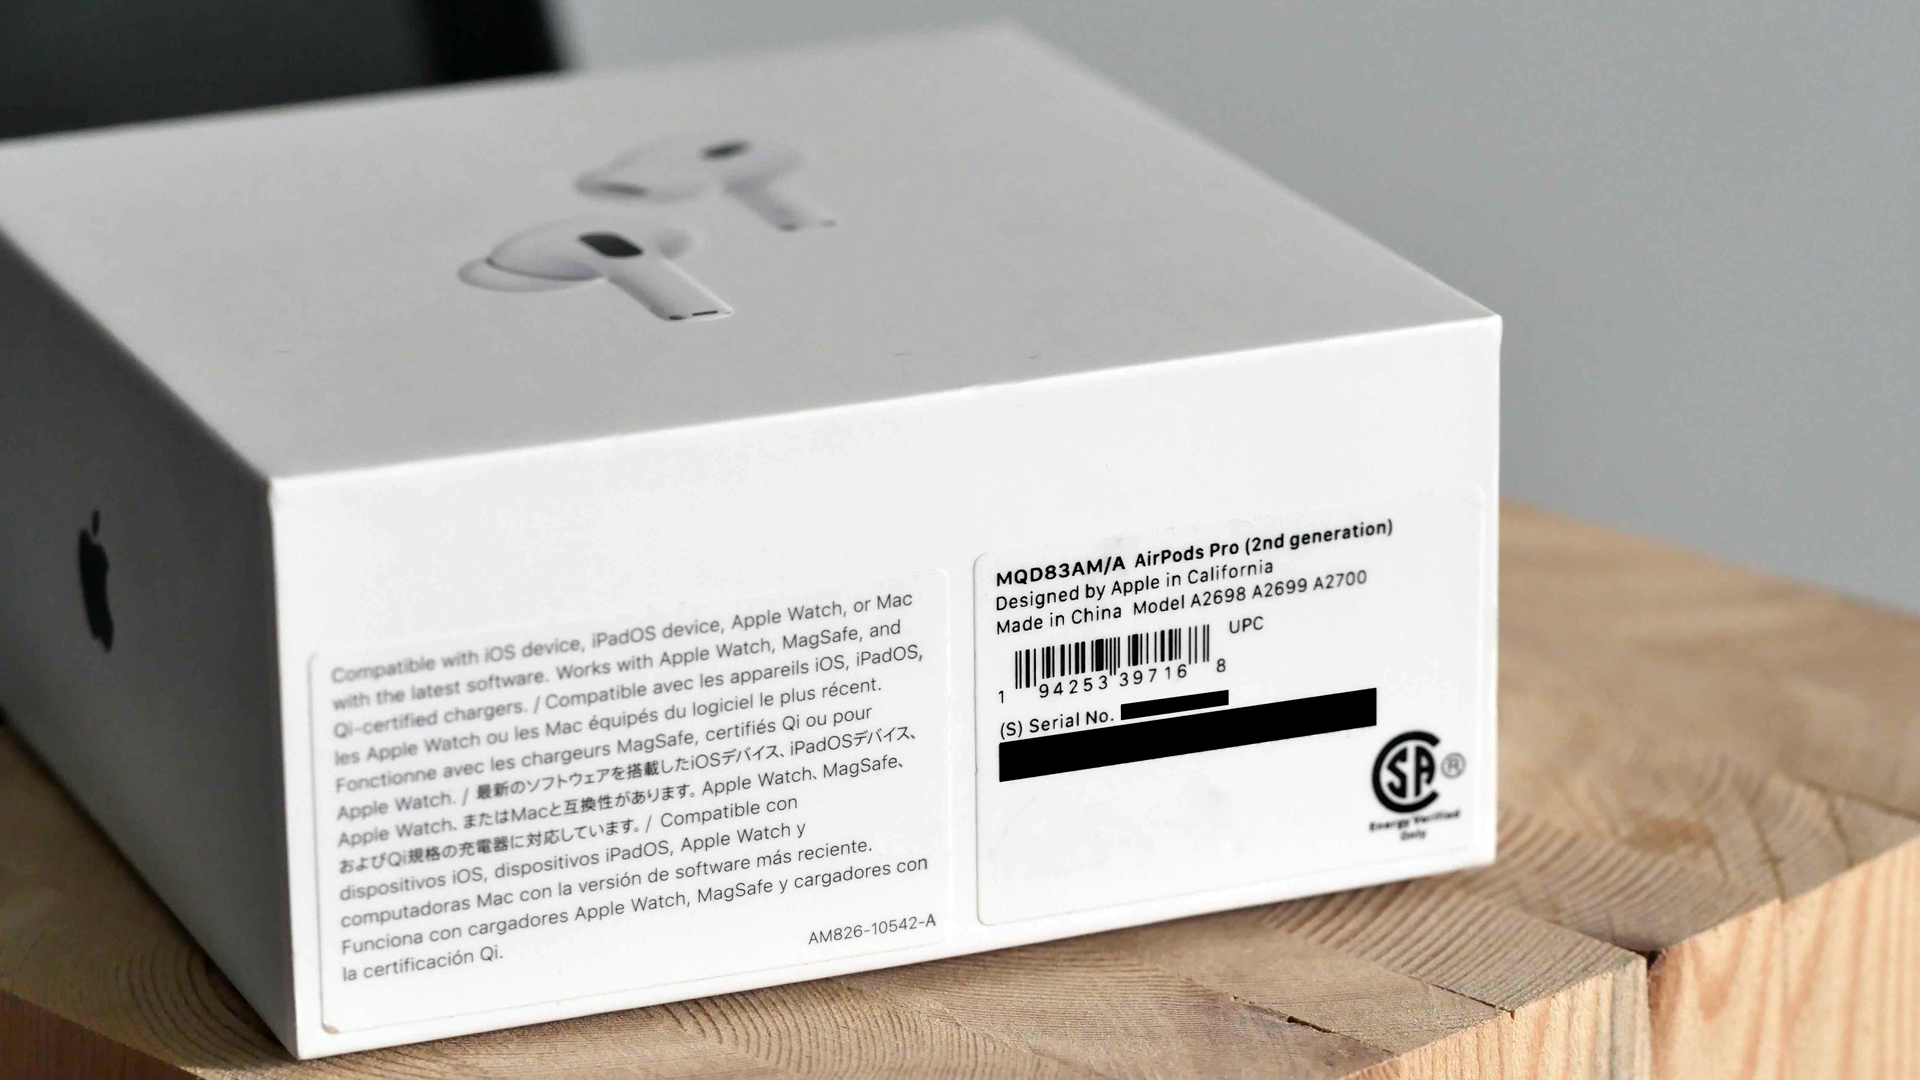 A photo of the Apple AirPods Pro 2ng generation box.